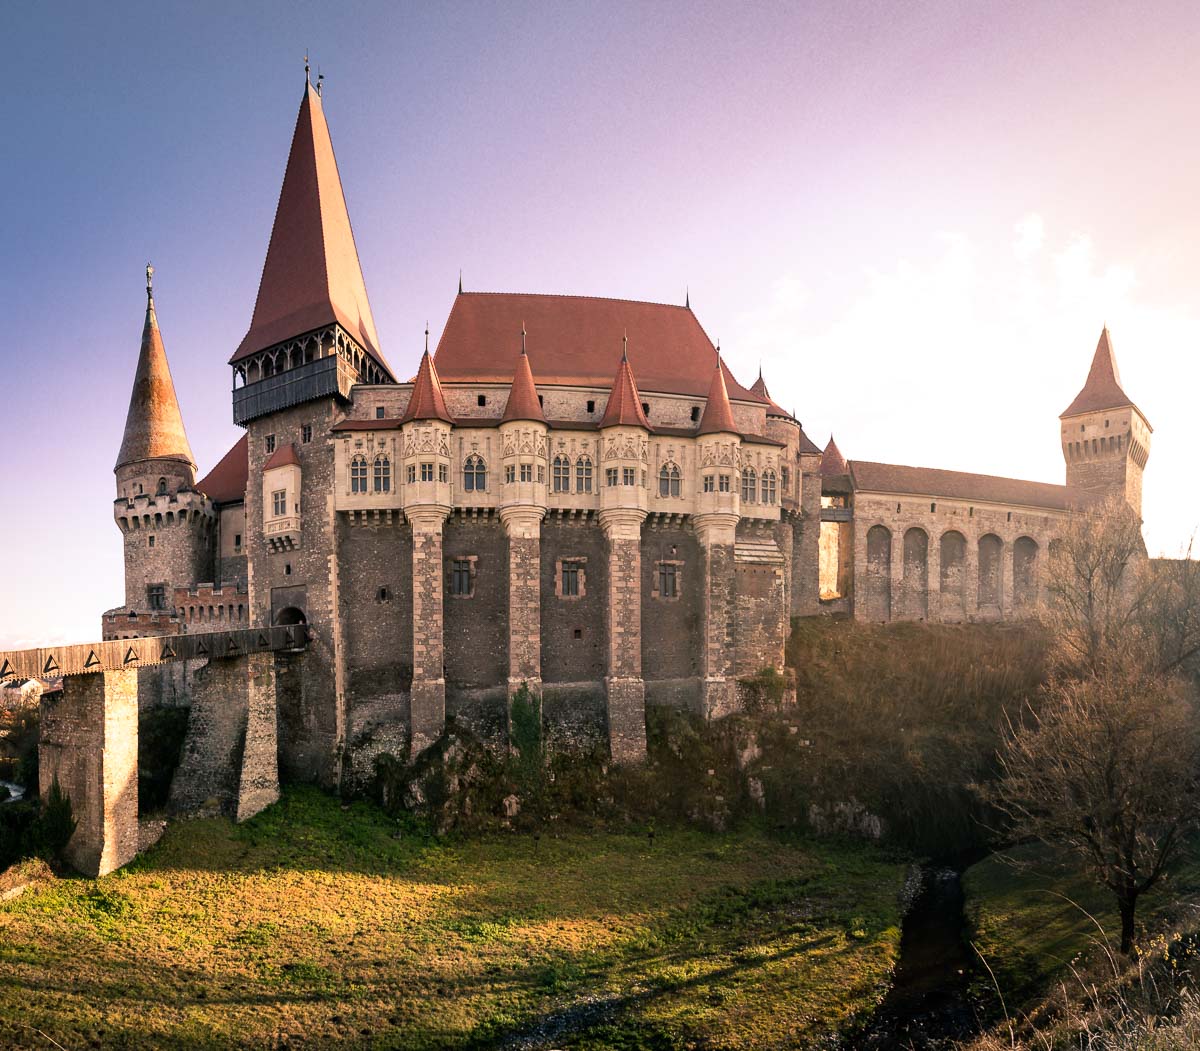 The Corvin Castle which is also known as the Hunyad Castle.